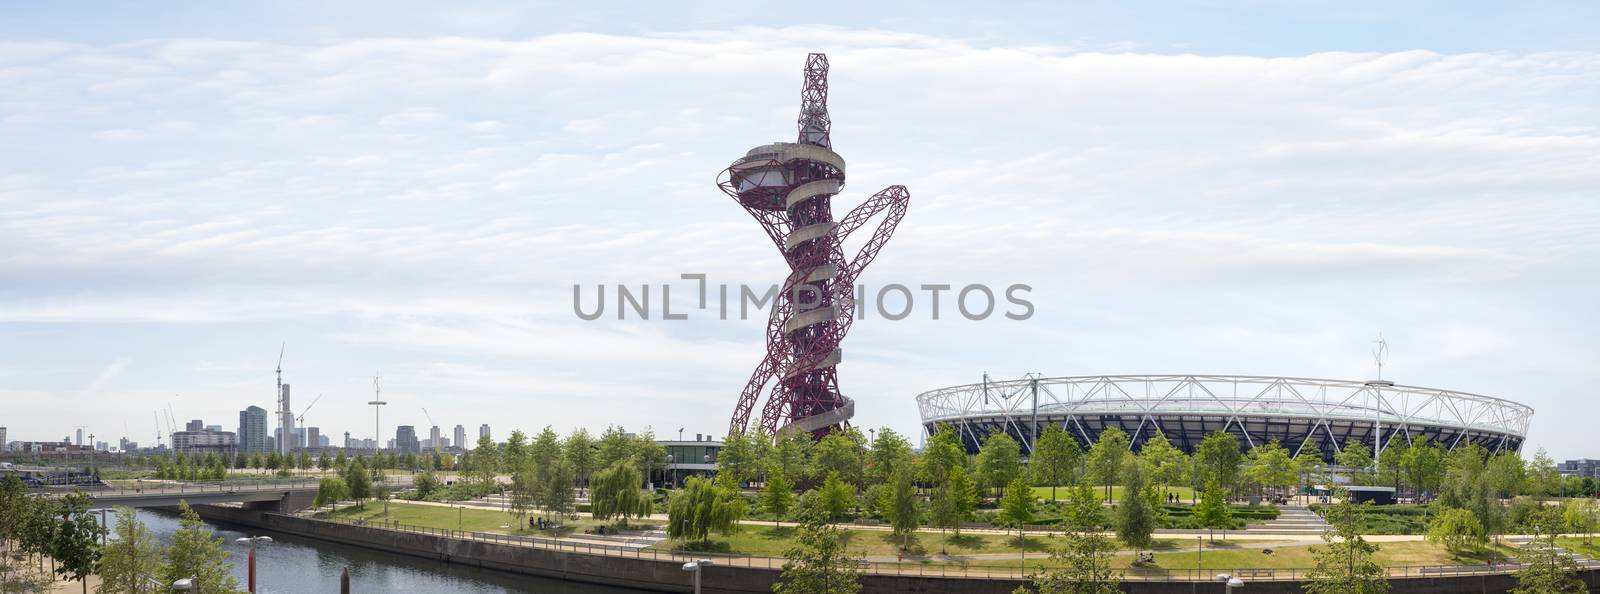 panorama of the london olympic stadium by morrbyte